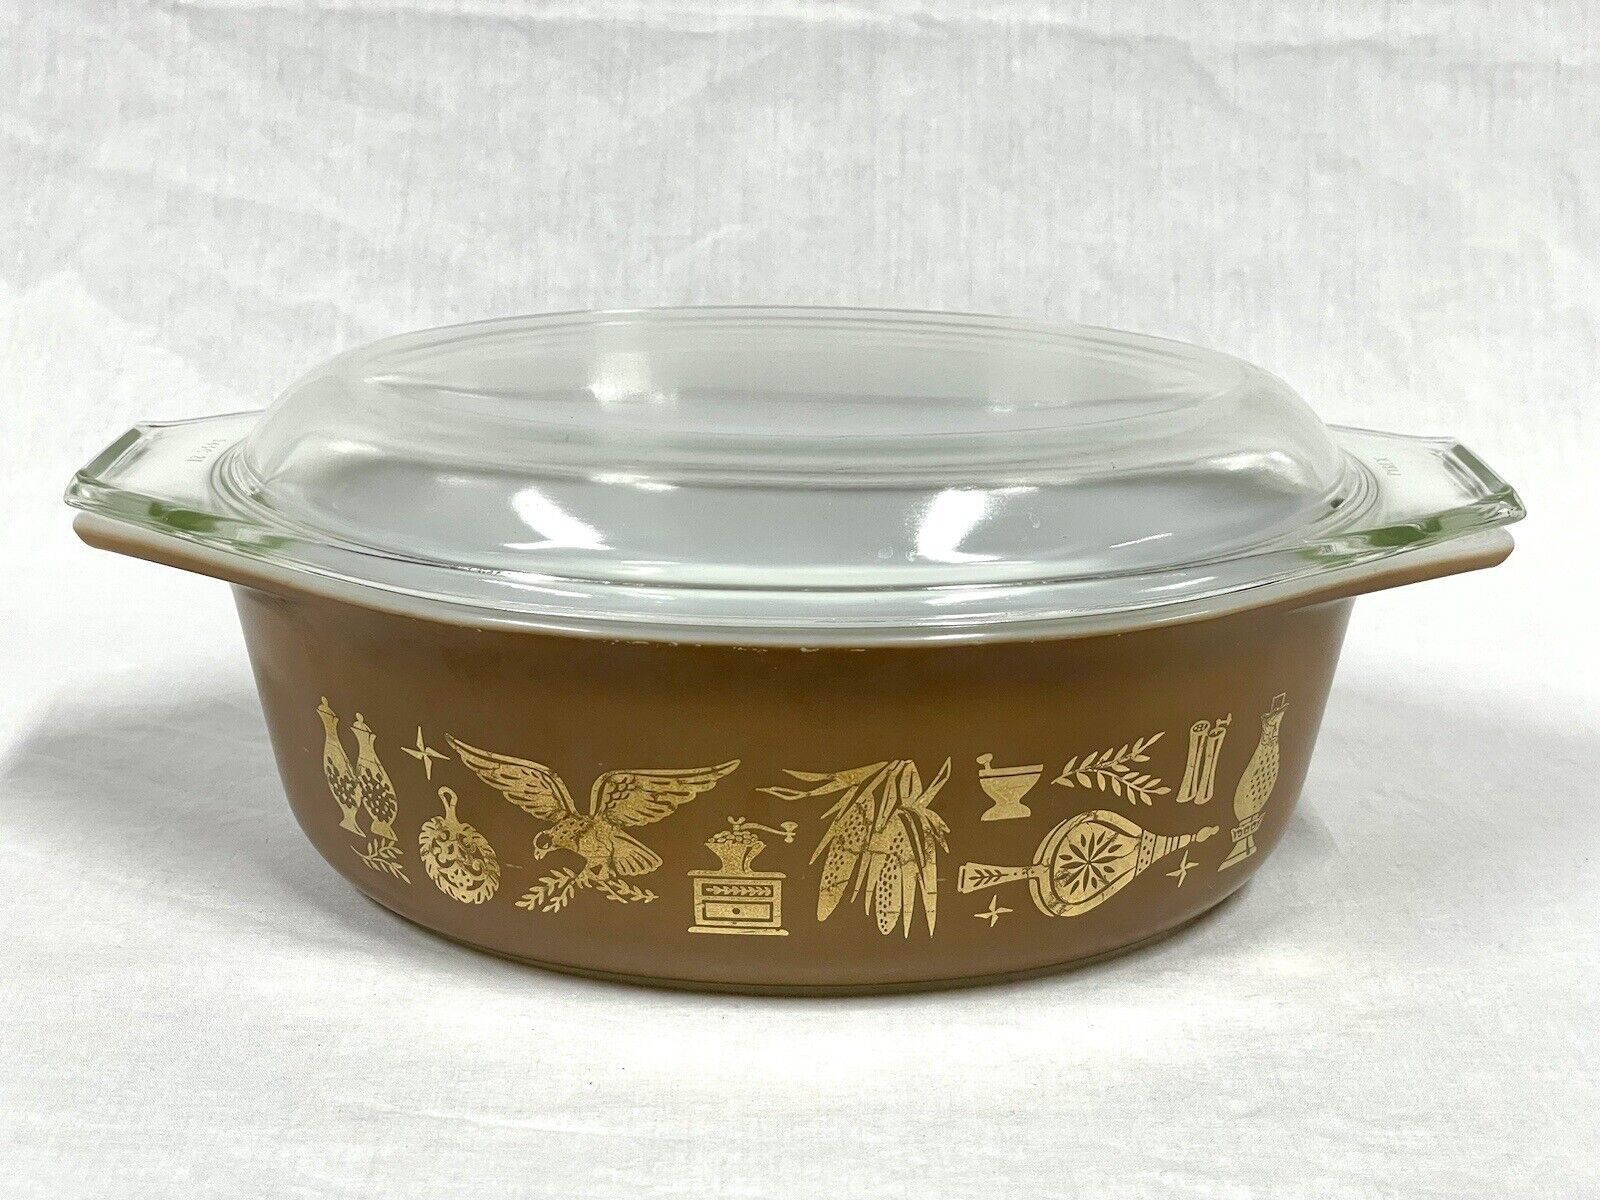 Vintage Pyrex Early American Eagle 1 1/2 QT Oval Casserole  #043 Bowl with Lid